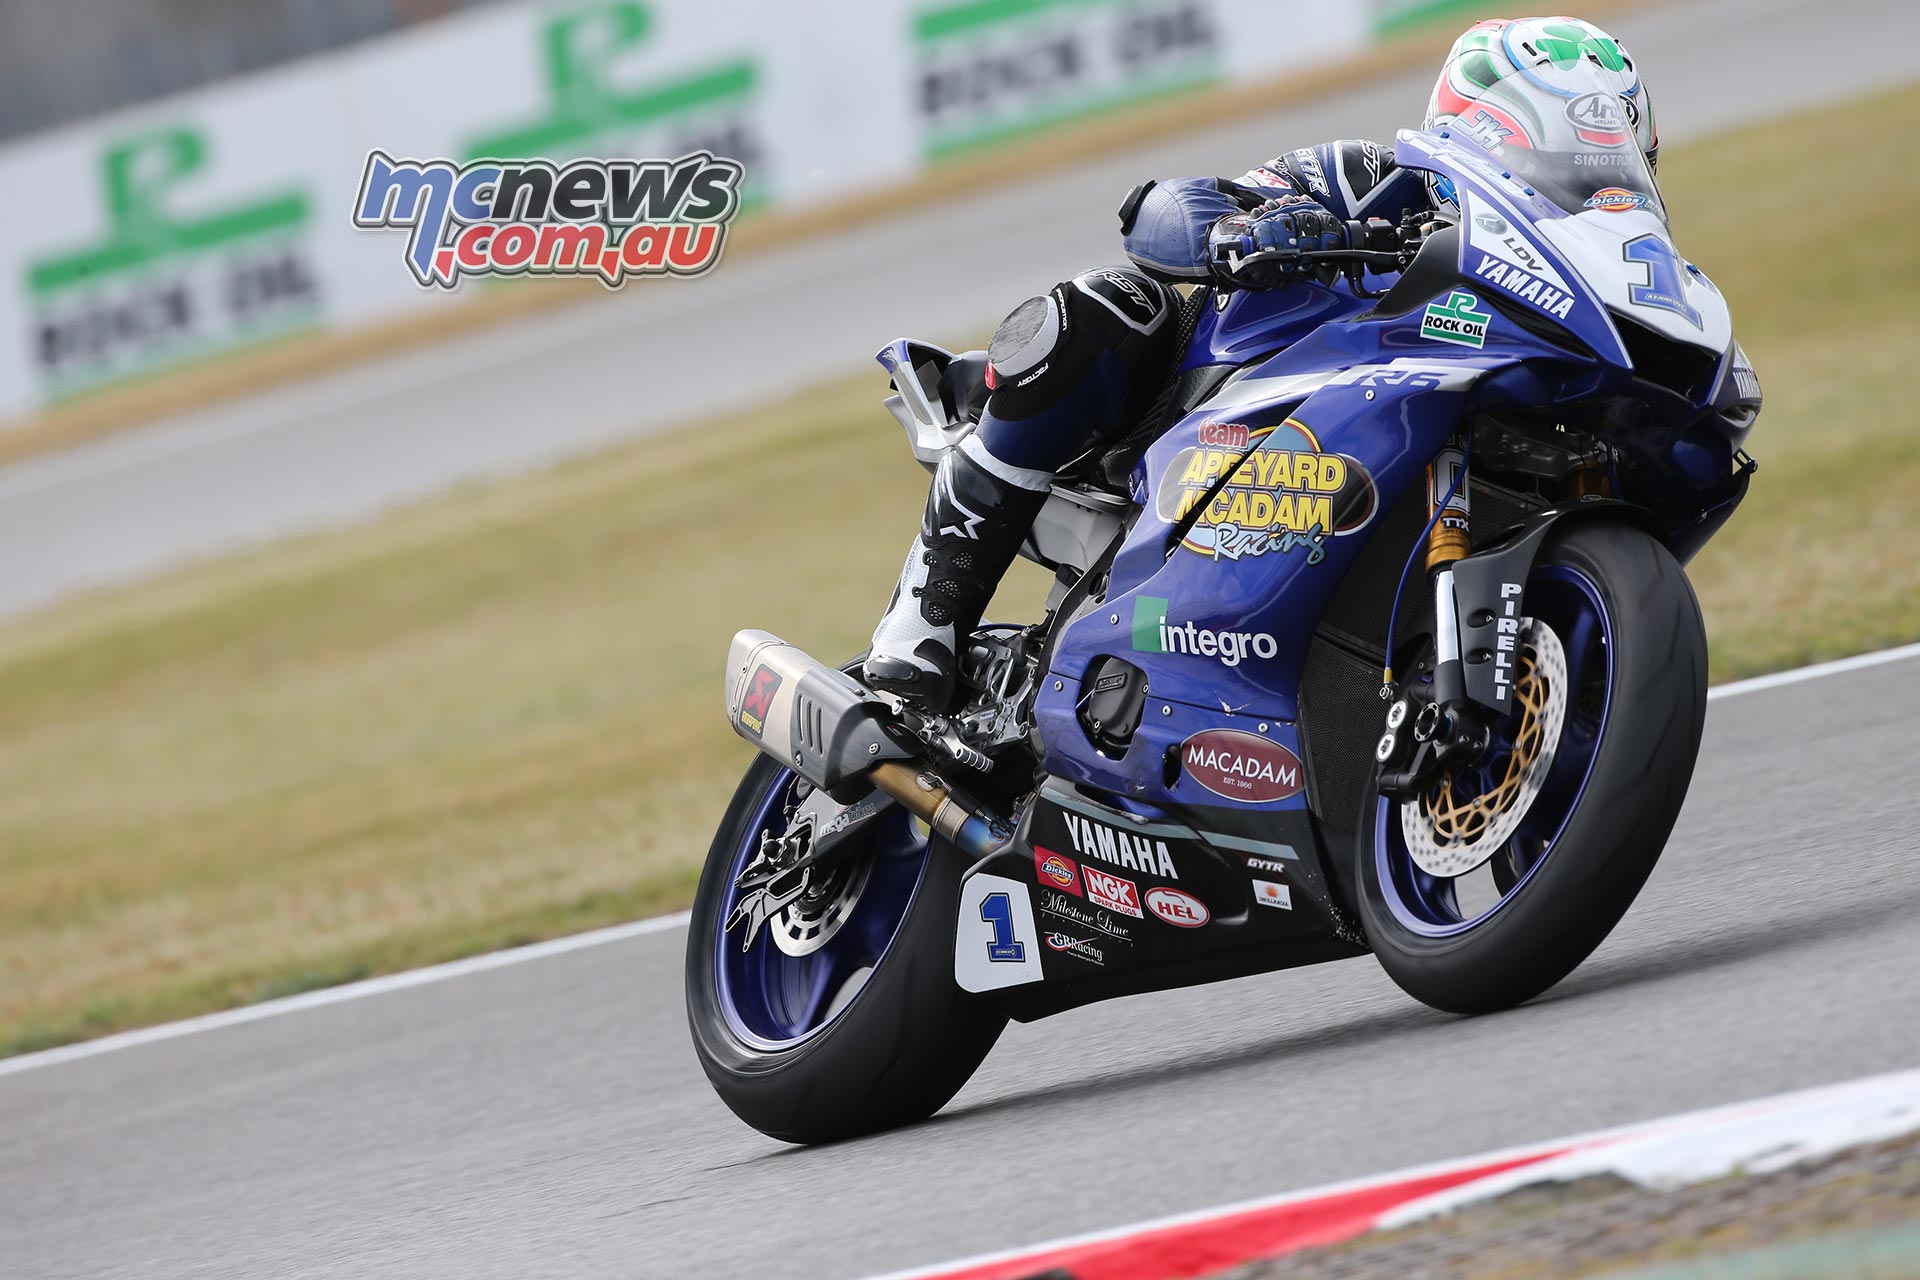 Snetterton Bsb Image Overload Part Two Mcnews